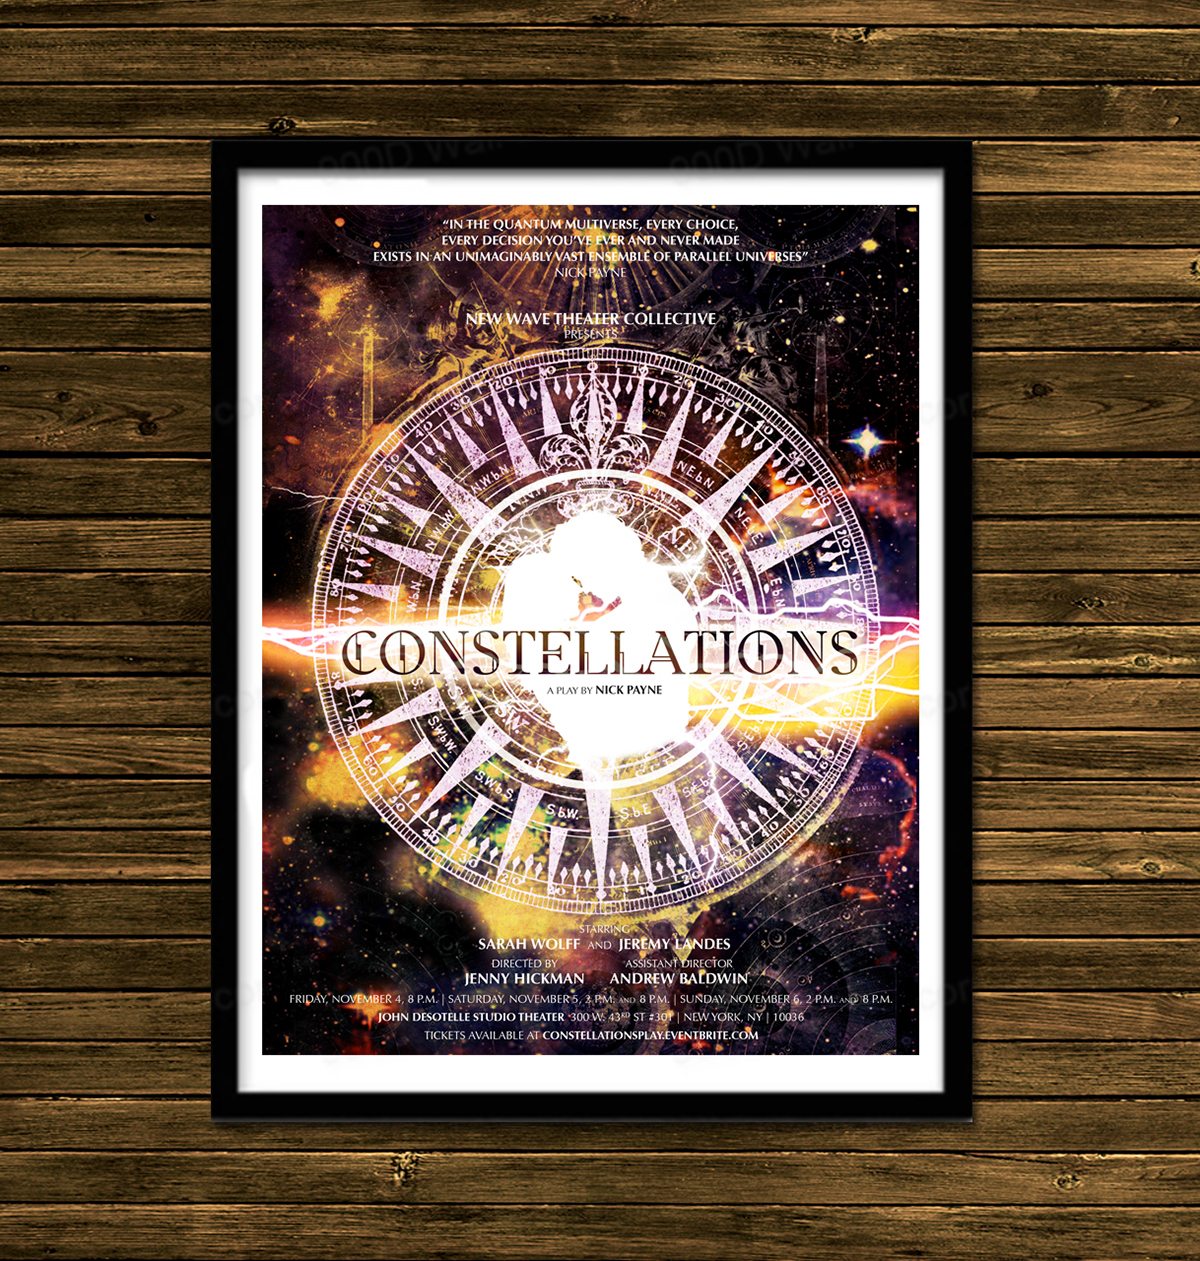 play broadway theater  Constellations promotional poster theater poster new york city